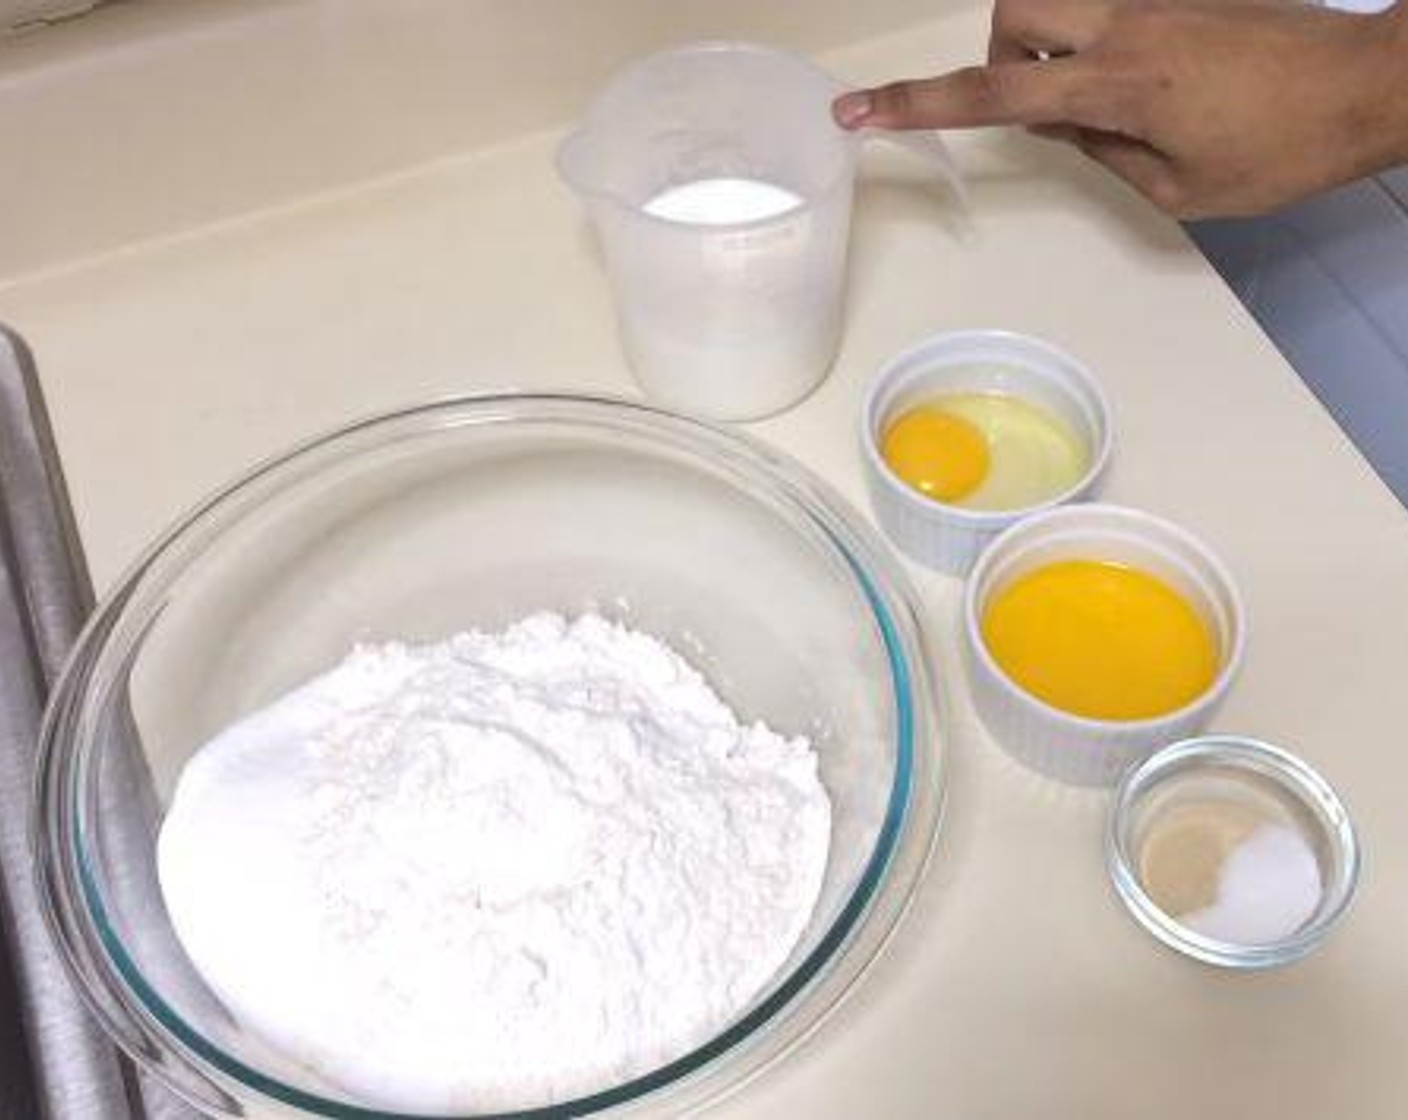 step 1 In a large mixing bowl, add All-Purpose Flour (3 1/3 cups), Granulated Sugar (1/4 cup) and Salt (1 tsp). Warm the Whole Milk (1 cup) to around 115 degrees C and melt the Butter (1/4 cup).